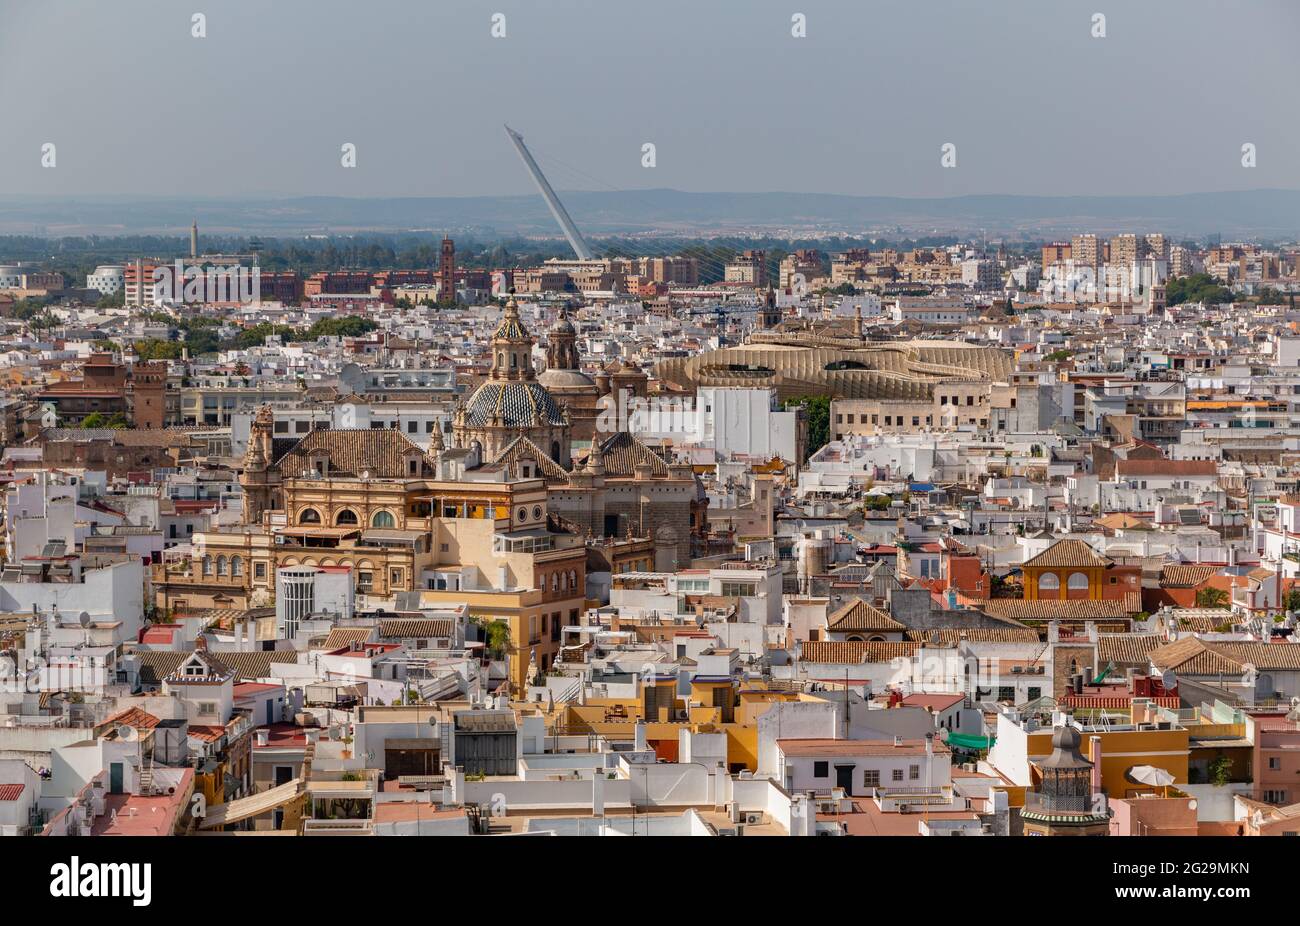 A picture of some landmarks of Seville as seen from above, such as the Metropol Parasol and The Church of the Divine Savior of Seville. Stock Photo